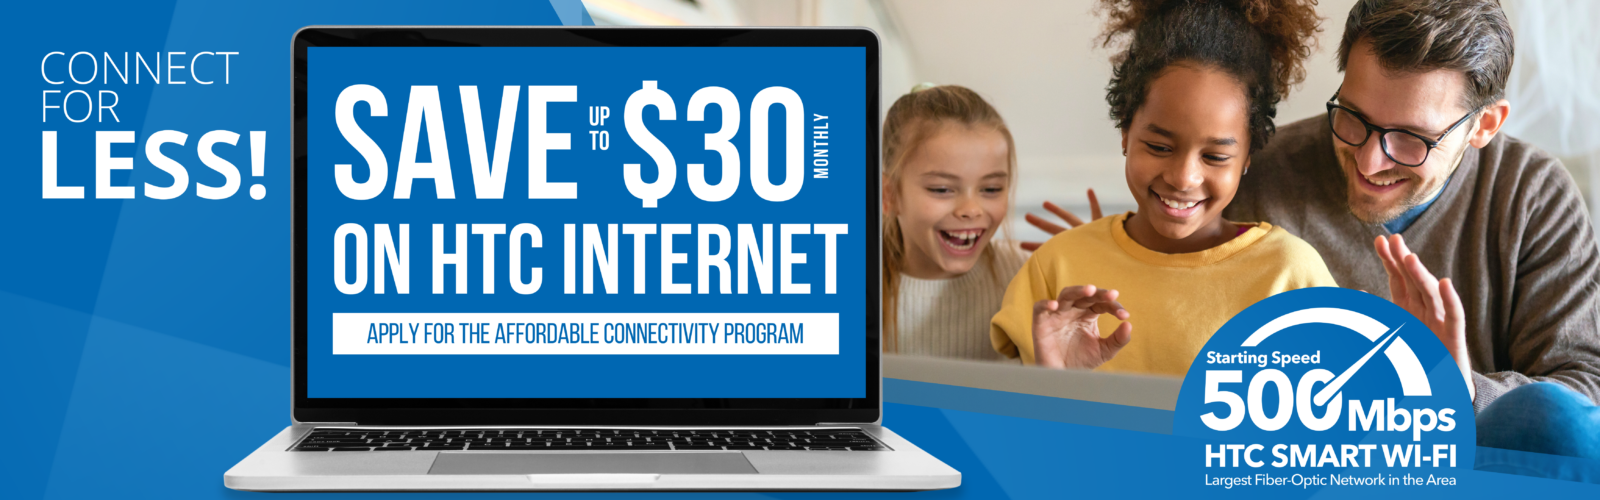 Get up to $30 discount on internet with the ACP